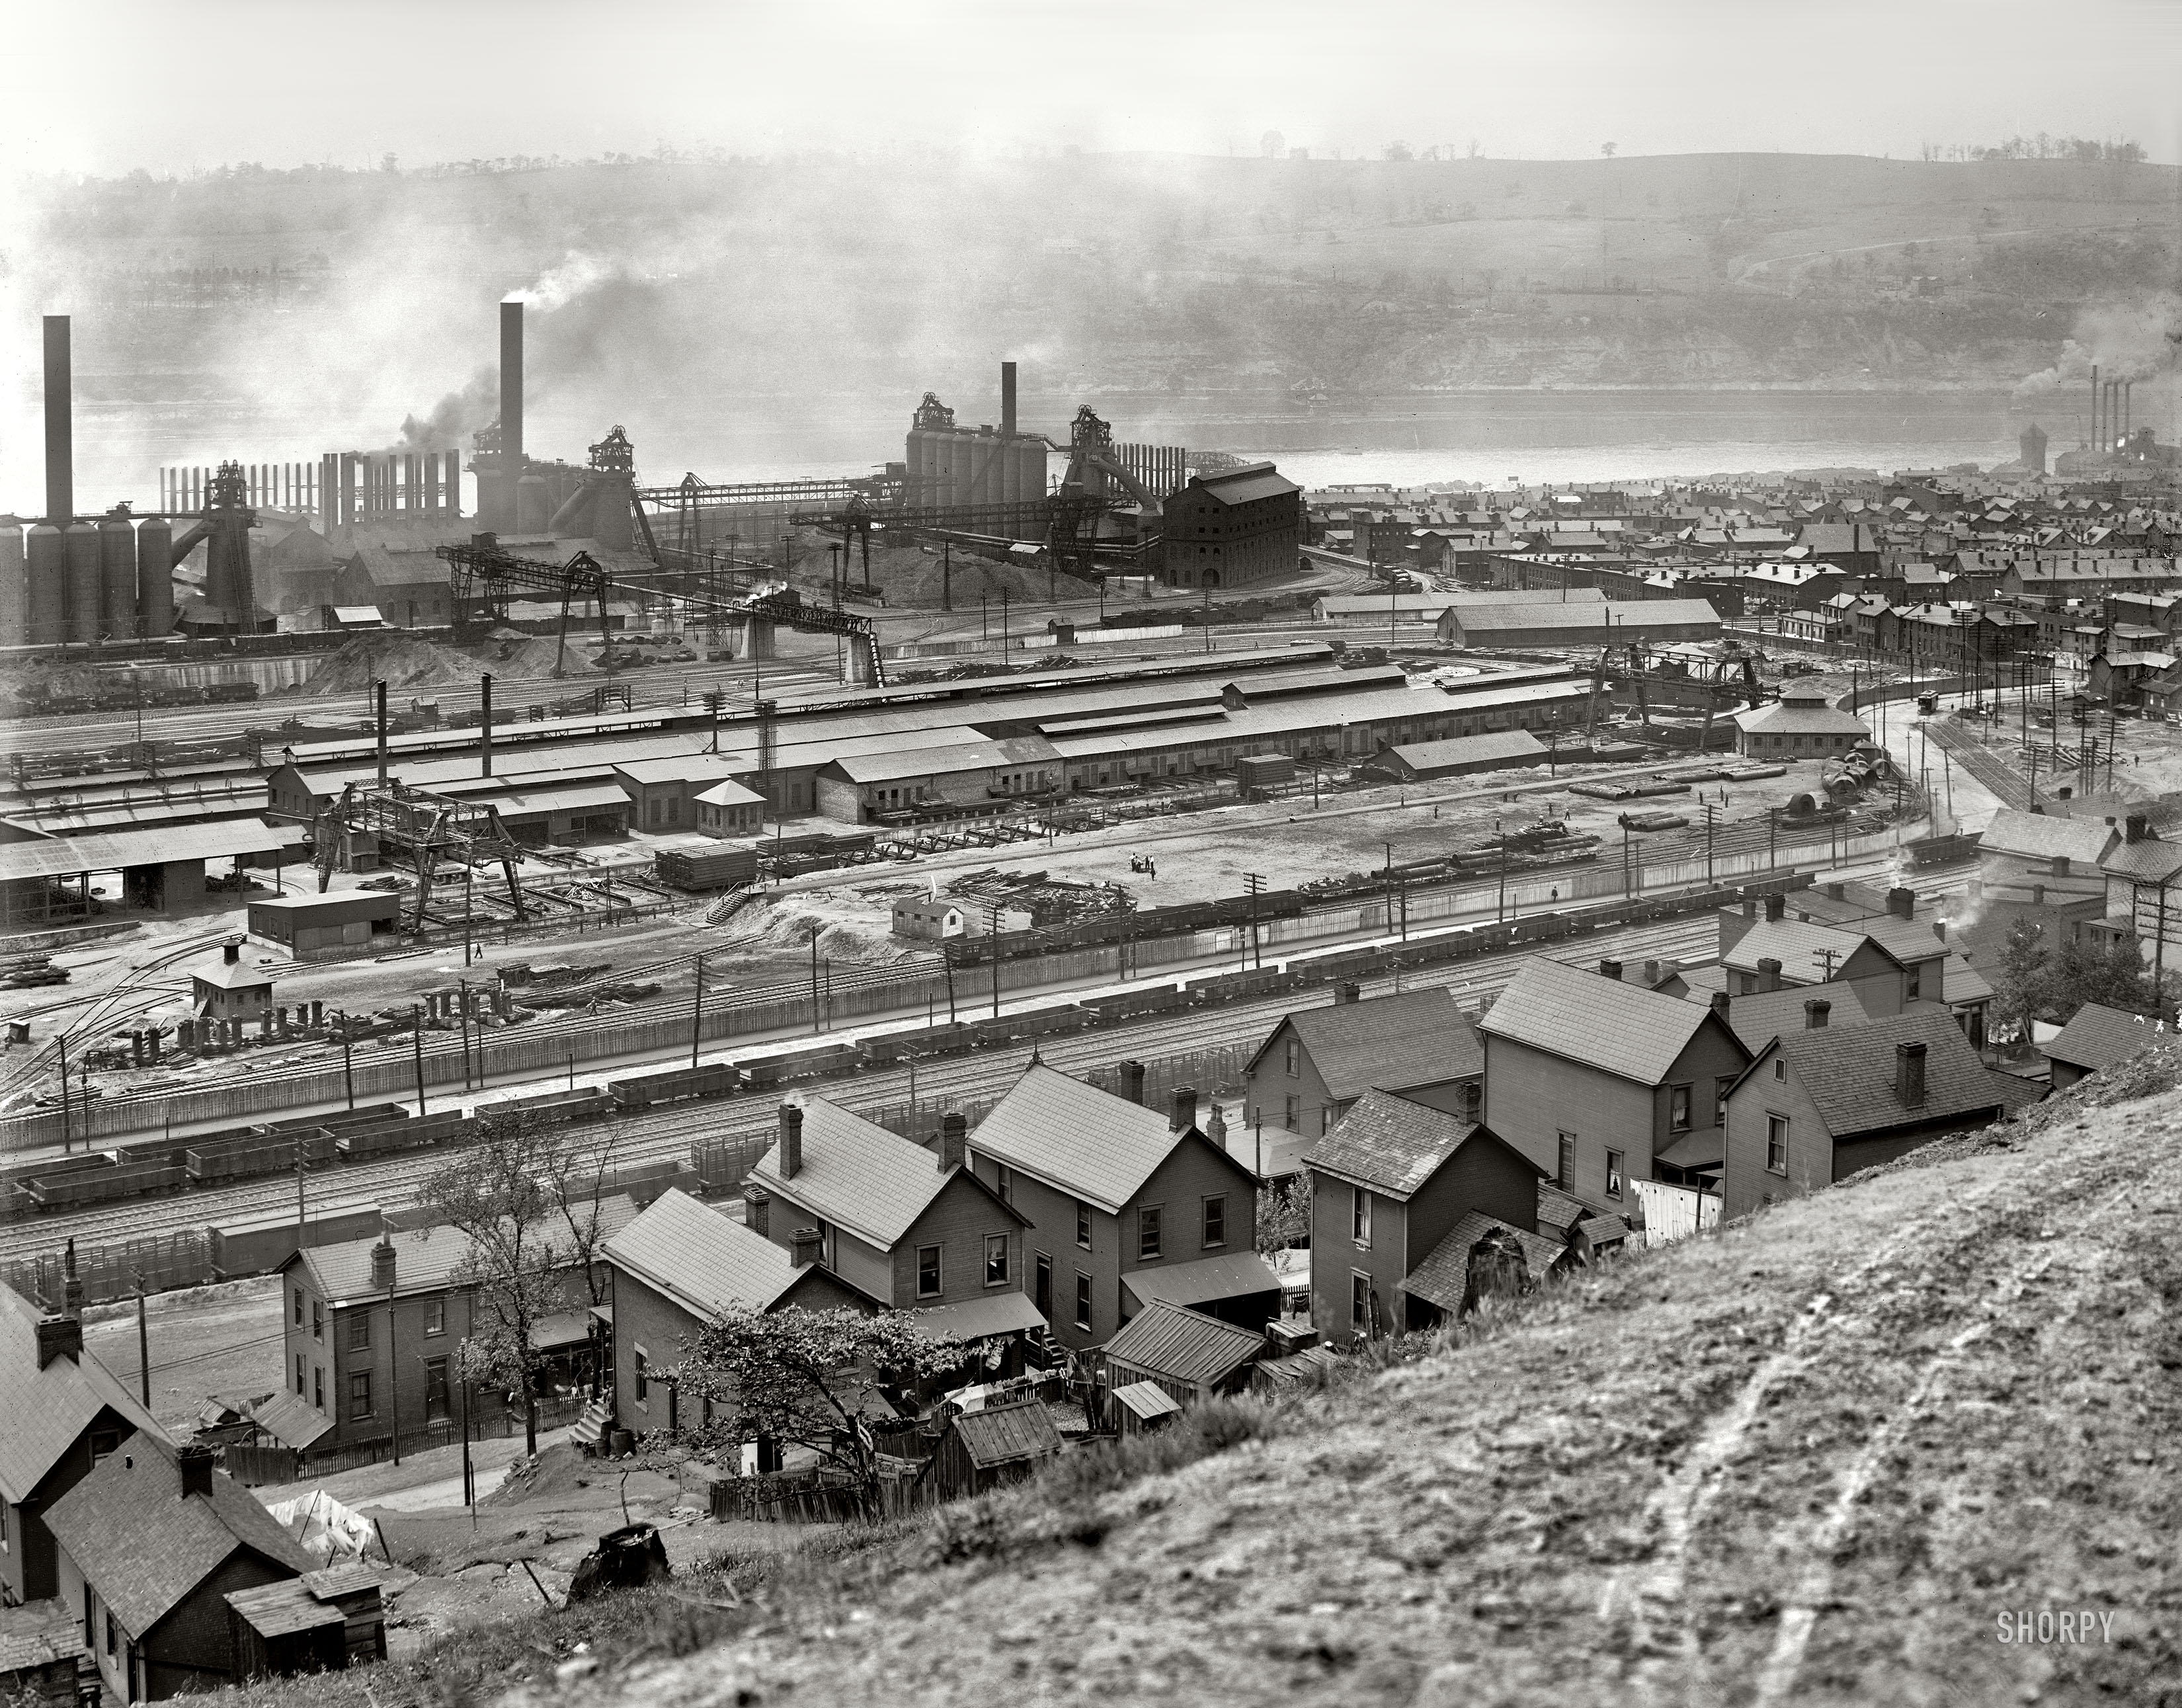 Braddock, Pennsylvania, circa 1908. "Edgar Thomson Works, Carnegie Steel Co." Part of a ginormous seven-section panorama of smoke-belching, throbbing industry. 8x10 dry plate glass negative, Detroit Publishing Co. View full size.